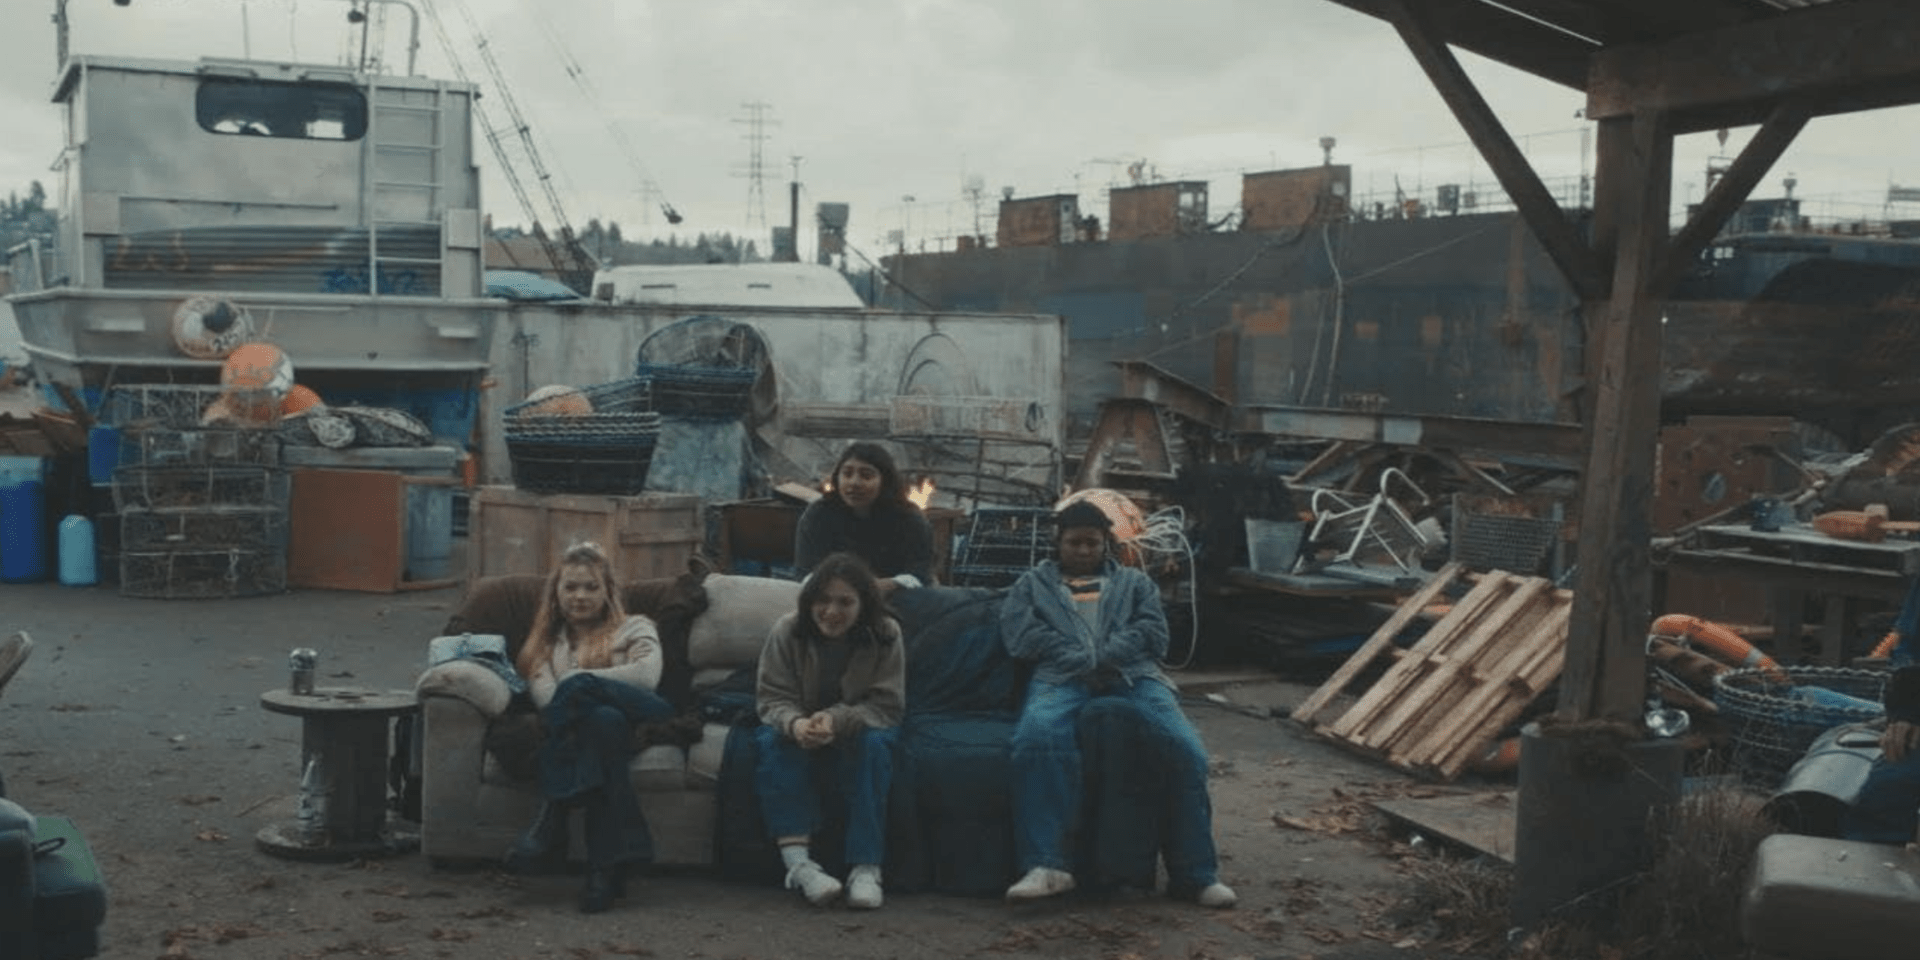 Four teenage girls sitting on a couch in a junkyard in this image from ABC Signature.